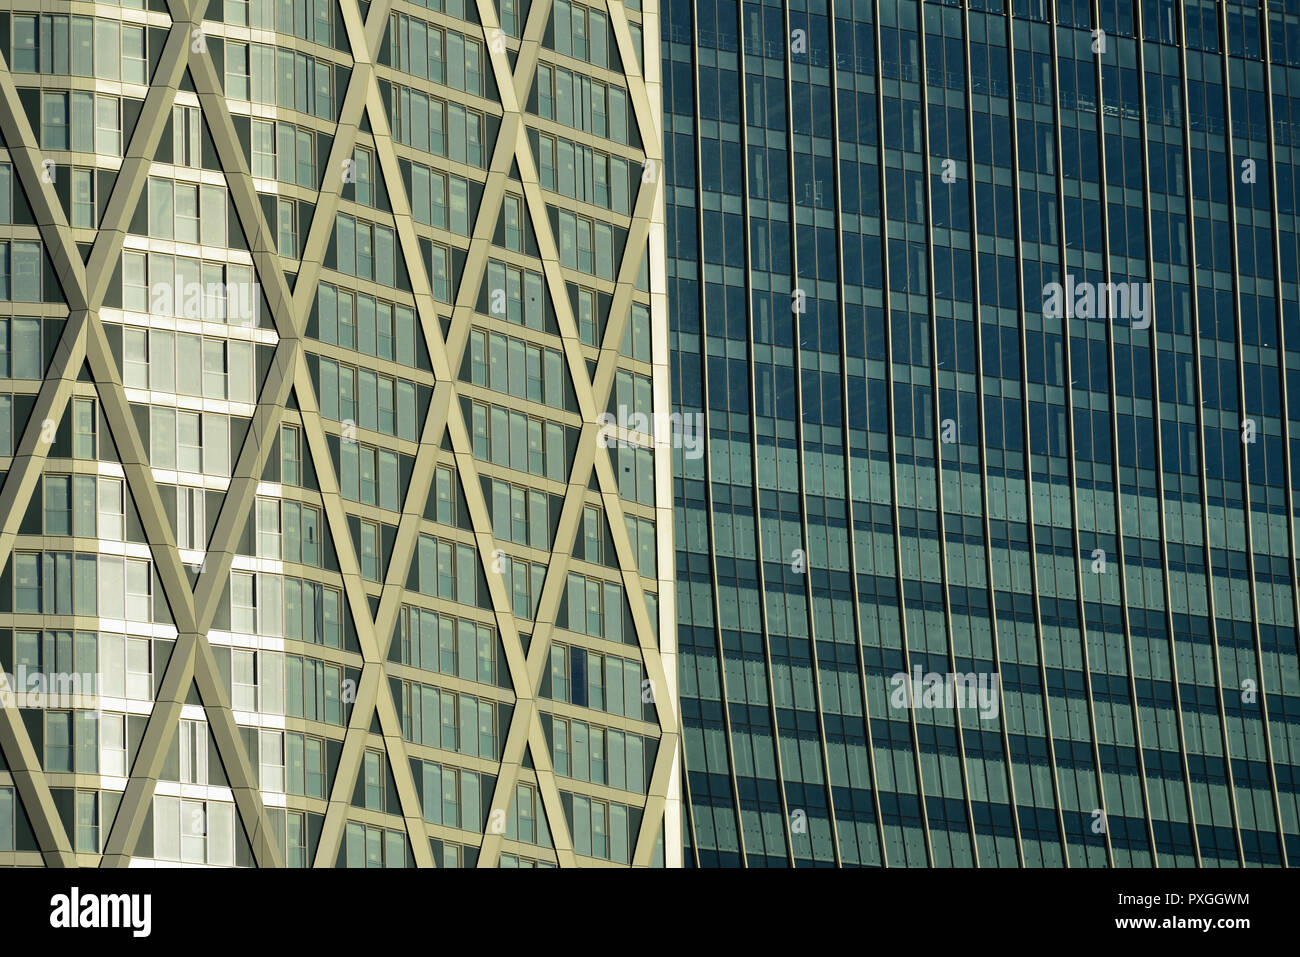 Office and residential development facades, Newfoundland and One Bank Street, Canary Wharf, East London. United Kingdom Stock Photo